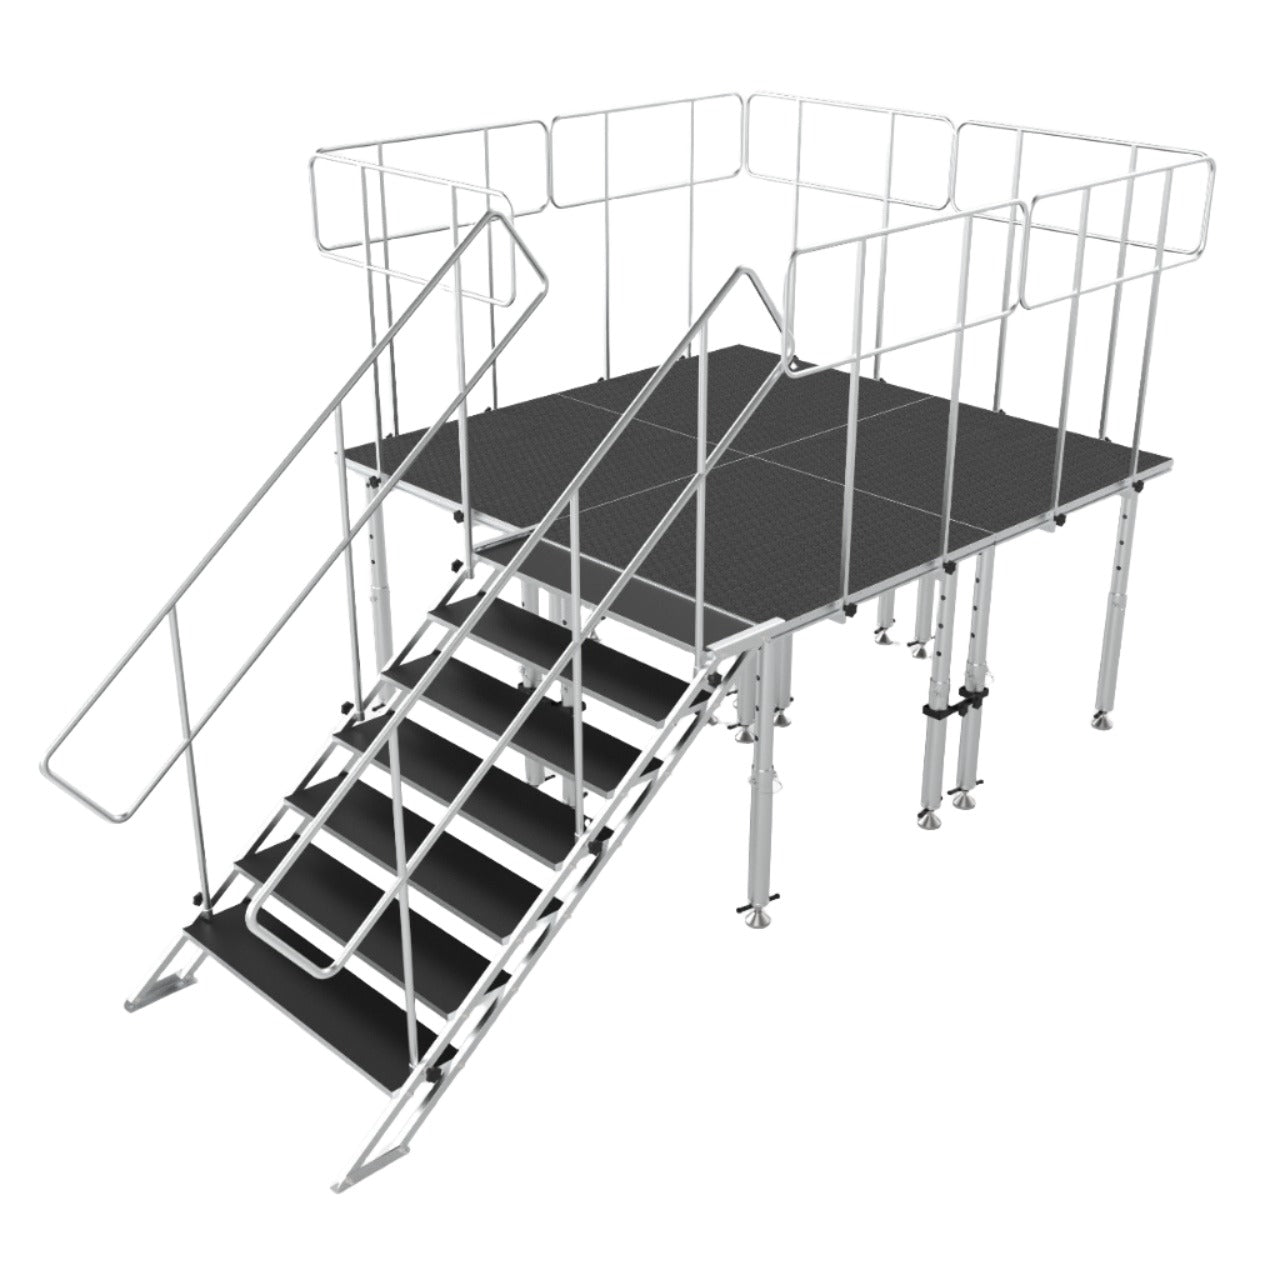 Pro X 8FT x 8FT Stage Q 2 Stage Platforms 3-Steps Social Distancing 4FT x 4FT Package Height Adjustable 28-48 inch XSQ-8X8PKG-44GRUST3